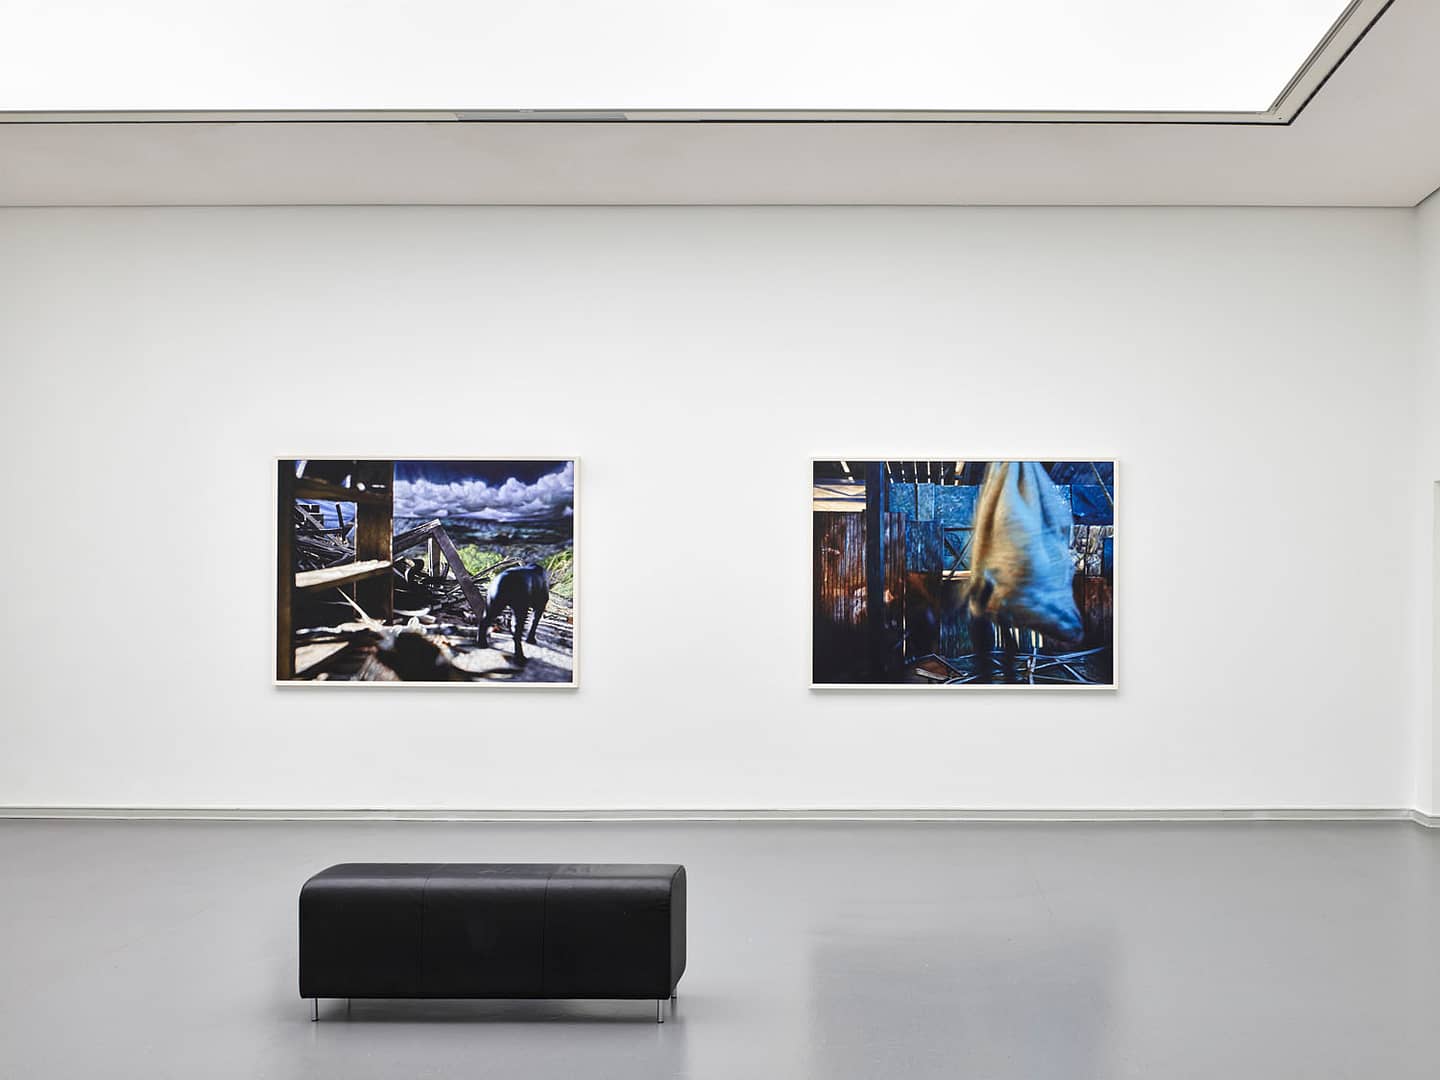 Exhibition view of Philipp Fröhlich's solo show Märchen at Von der Heydt Kunsthalle Barmen, produced by Kunst- und Museumsverein Wuppertal. The image shows two paintings based on a popular Australian fairy tale called "the Hobyahs".